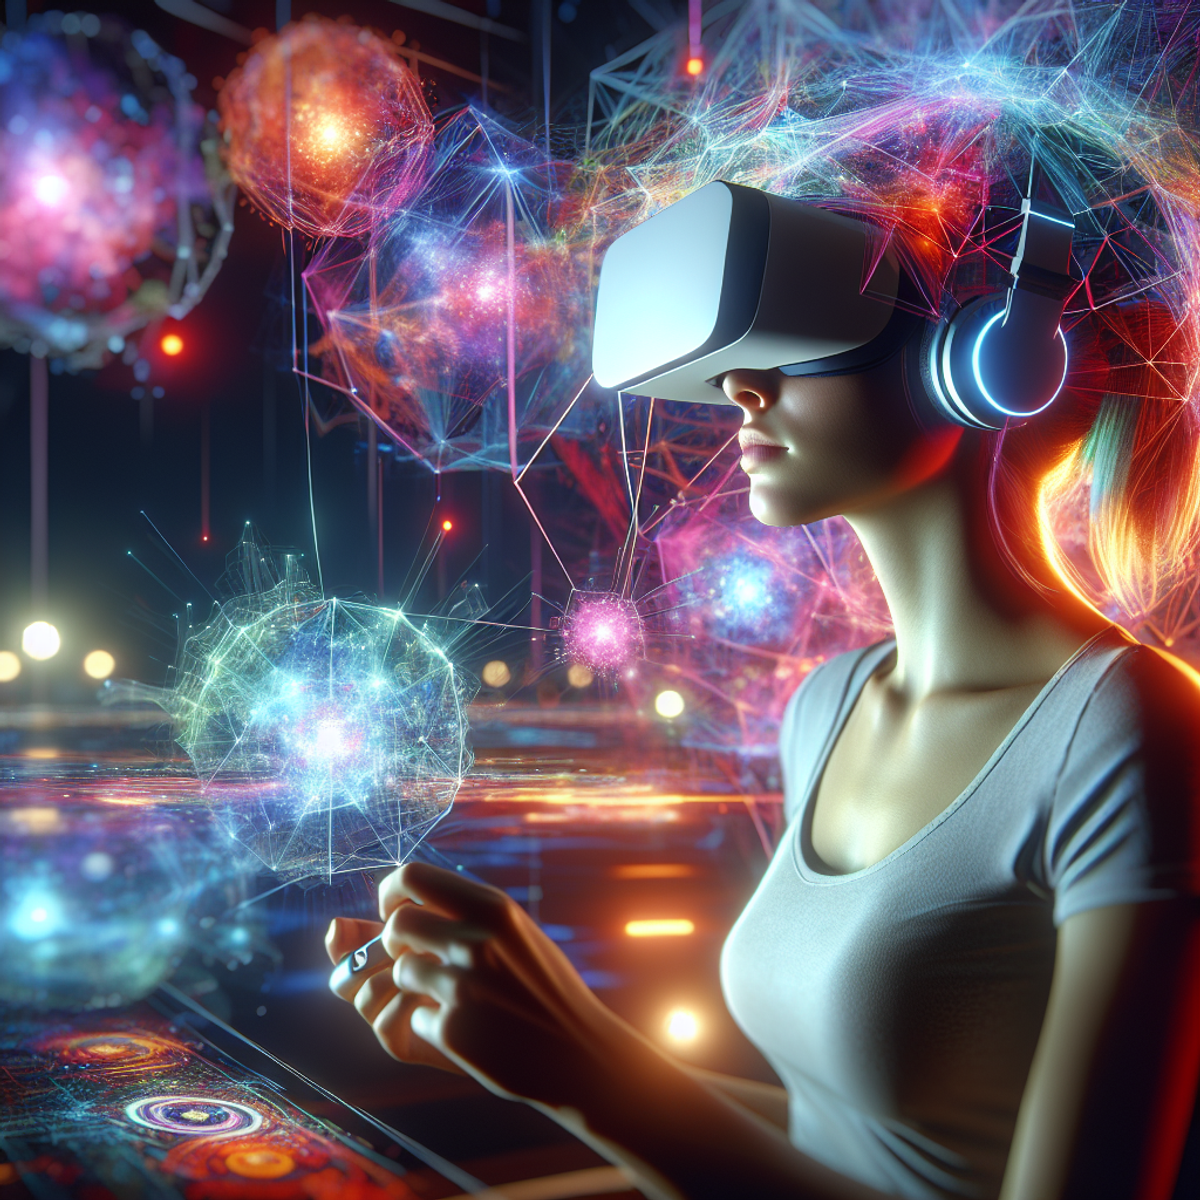 A Caucasian woman immersed in a futuristic digital world, surrounded by complex light patterns and abstract structures while wearing a virtual reality headset.